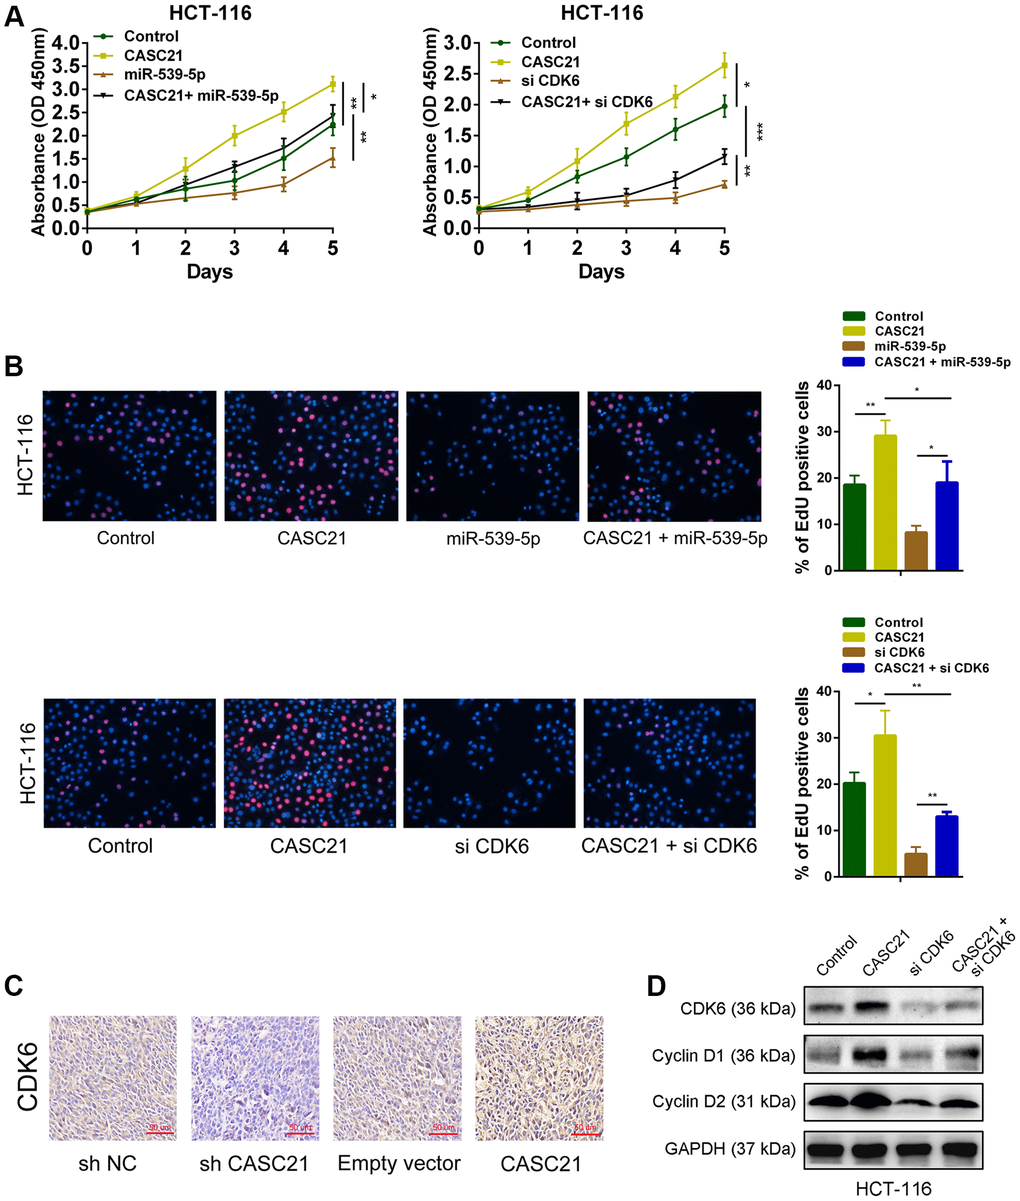 CASC21 promotes CRC proliferation by regulating CDK6 expression. (A) CCK-8 assays demonstrated that CASC21 promoted CRC cell growth, miR-539-5p overexpression or CDK6 knockdown could abolish growth promotion caused by CASC21. (B) EdU assays showed that miR-539-5p overexpression or CDK6 knockdown abolished the increased proliferation rates of HCT-116 cells caused by CASC21. (C) Representative images of CDK6 immunostaining of tumor samples from different groups. (D) Expression of CDK6, cyclin D1 and cyclin D2 was detected by western blot in HCT-116 cells with indicated treatment. All data represent mean ± SEM (n = 3-6). *P 